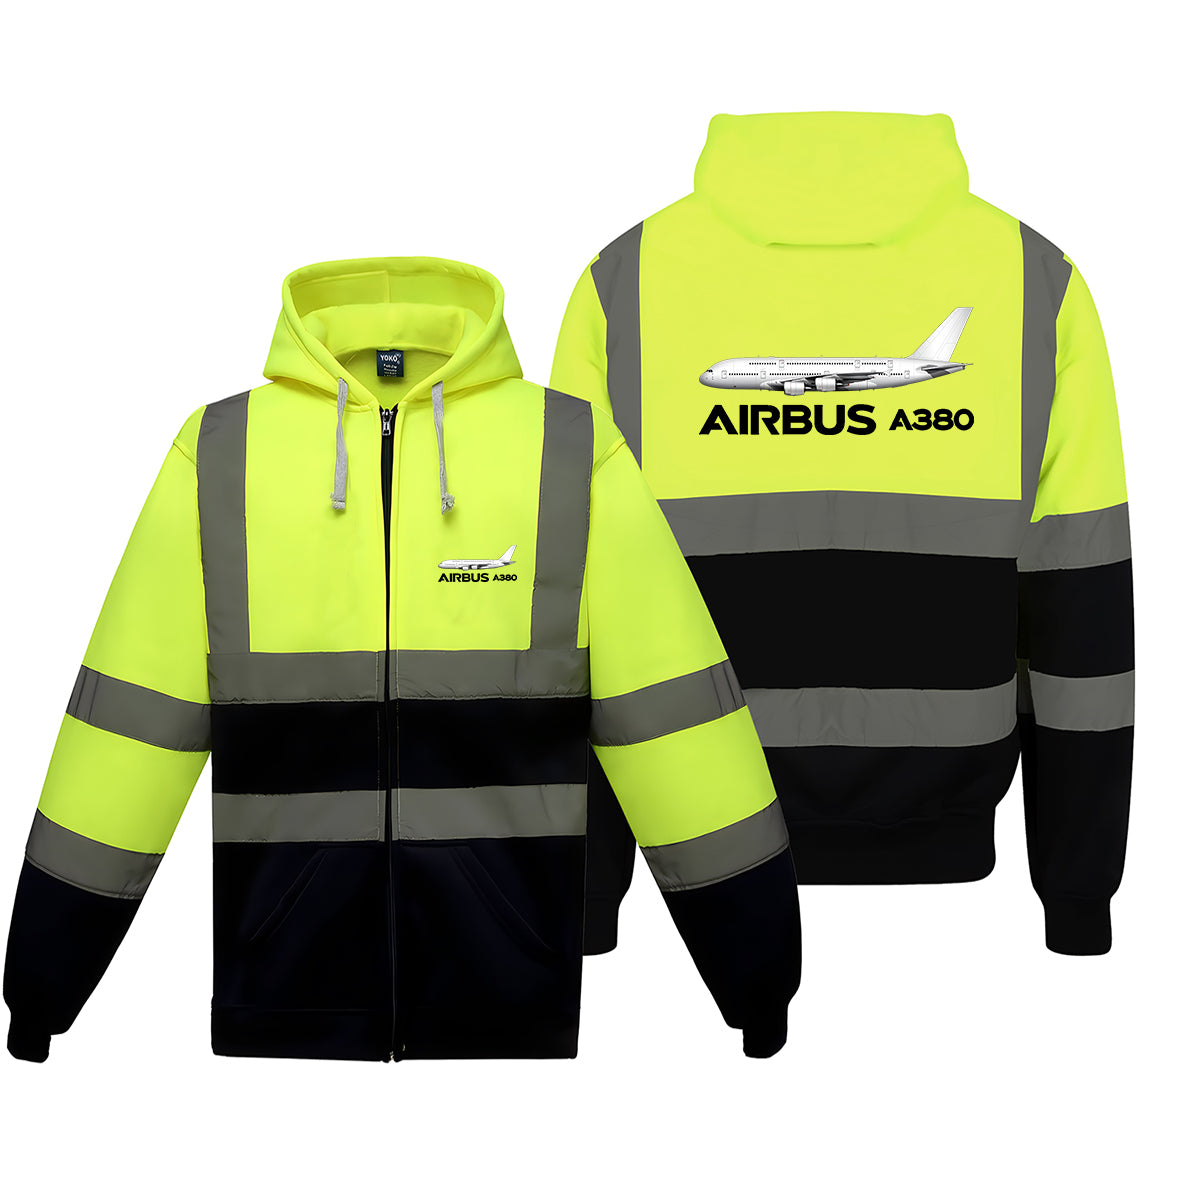 The Airbus A380 Designed Reflective Zipped Hoodies